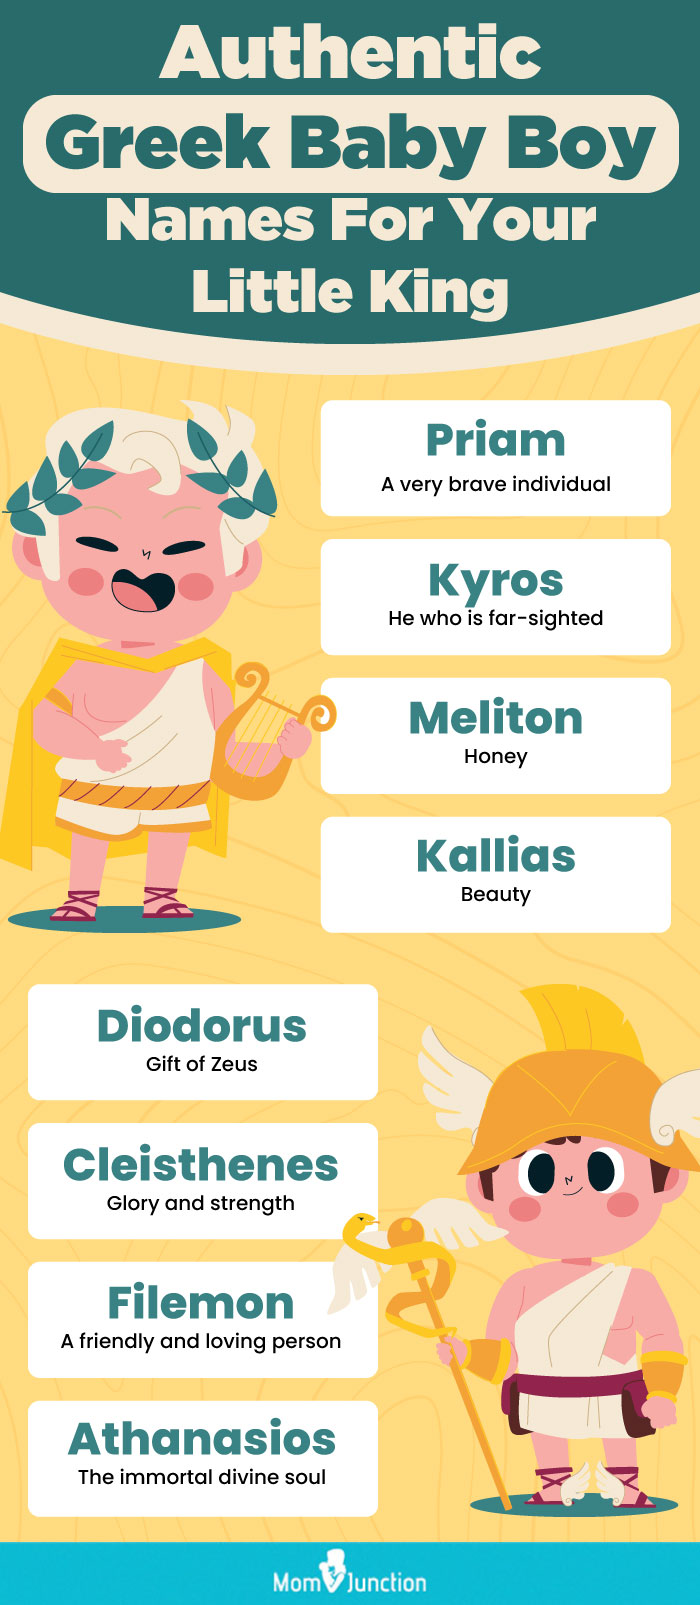 authentic greek baby boy names for your little king (infographic)